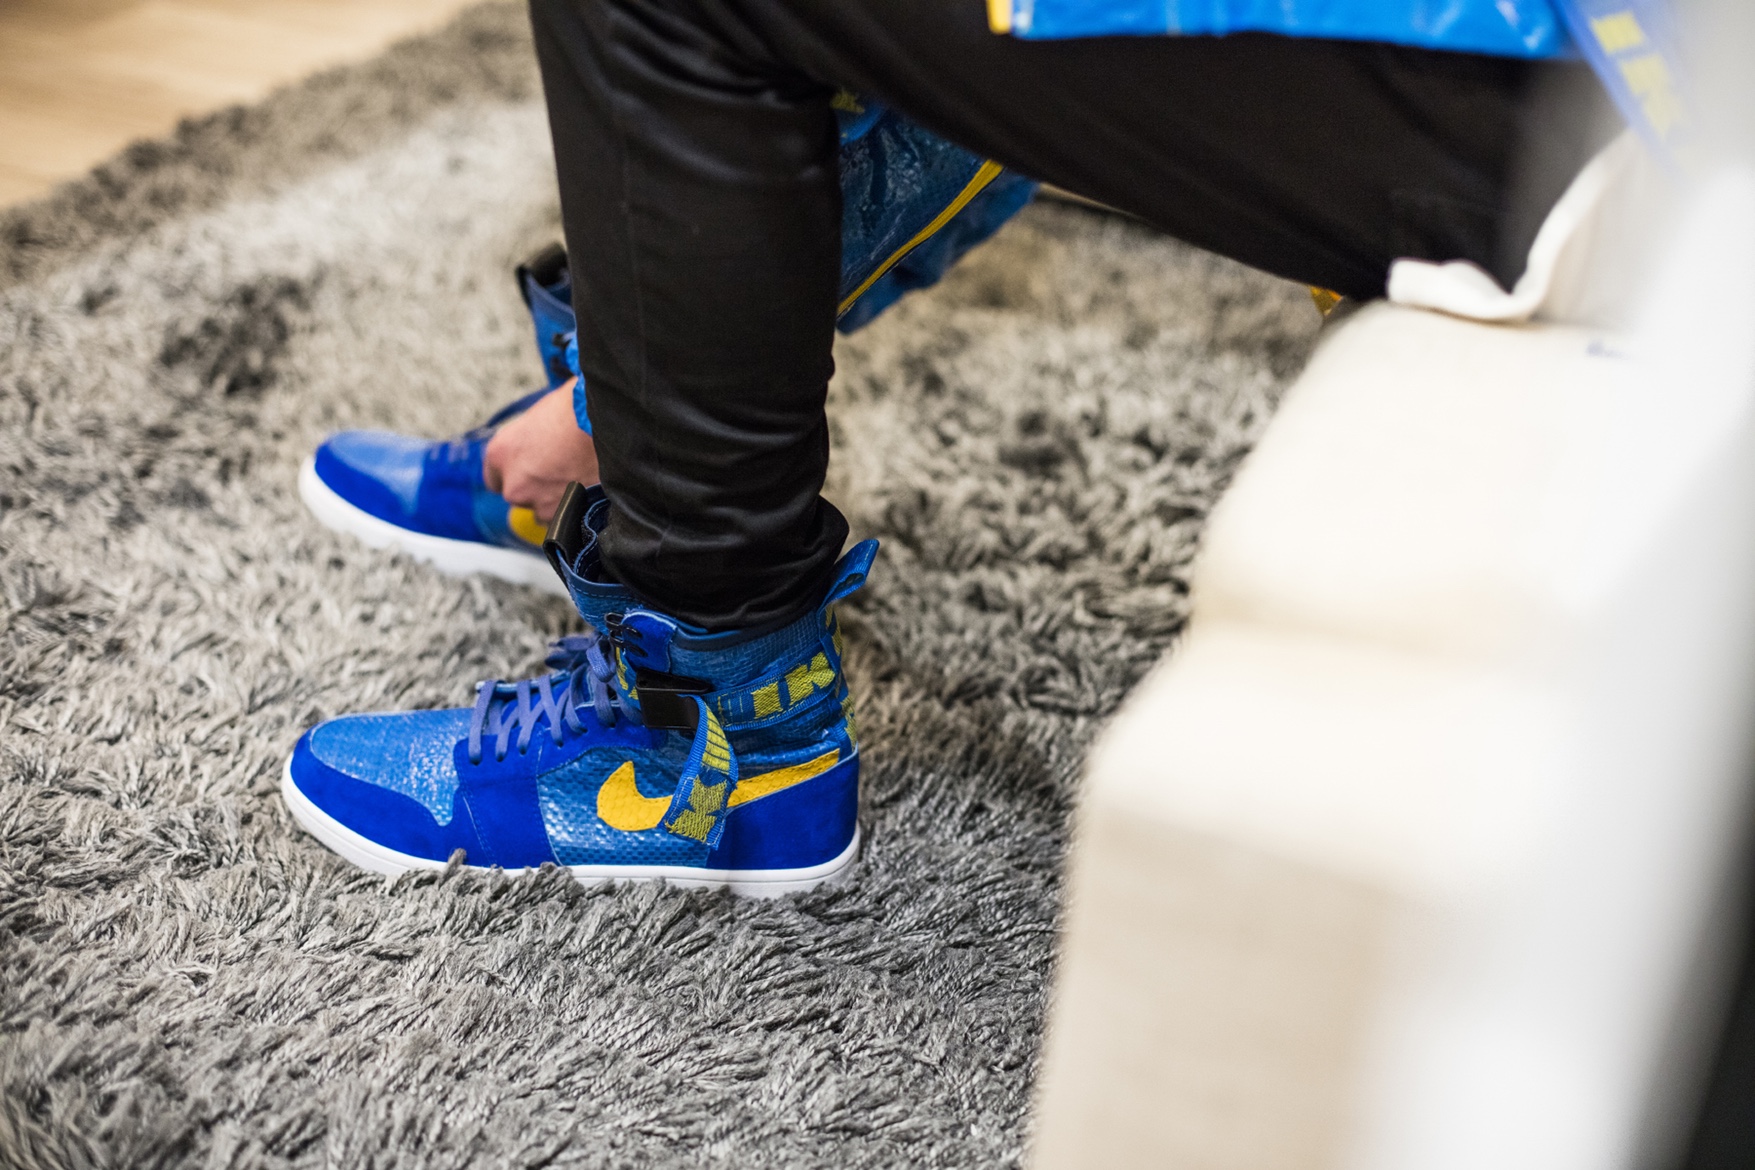 Get The “IKEA Pack” Including An Air Jordan 1 And Bomber Jacket